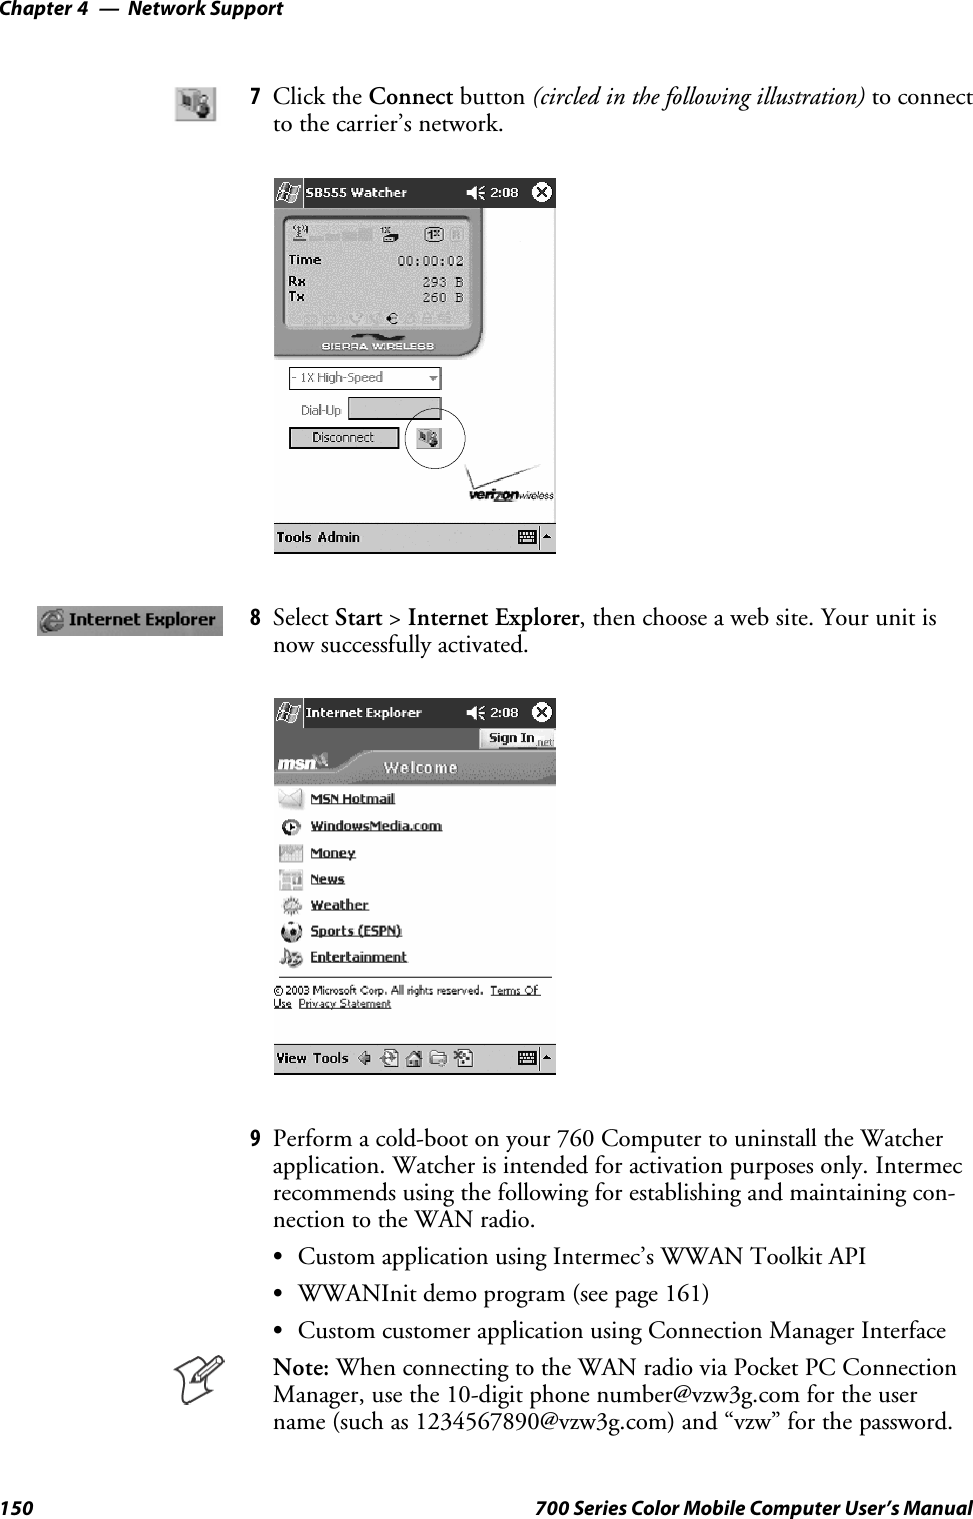 Network SupportChapter —4150 700 Series Color Mobile Computer User’s Manual7Click the Connect button (circled in the following illustration) to connectto the carrier’s network.8Select Start &gt;Internet Explorer, then choose a web site. Your unit isnow successfully activated.9Perform a cold-boot on your 760 Computer to uninstall the Watcherapplication. Watcher is intended for activation purposes only. Intermecrecommends using the following for establishing and maintaining con-nection to the WAN radio.SCustom application using Intermec’s WWAN Toolkit APISWWANInit demo program (see page 161)SCustom customer application using Connection Manager InterfaceNote: When connecting to the WAN radio via Pocket PC ConnectionManager, use the 10-digit phone number@vzw3g.com for the username (such as 1234567890@vzw3g.com) and “vzw” for the password.